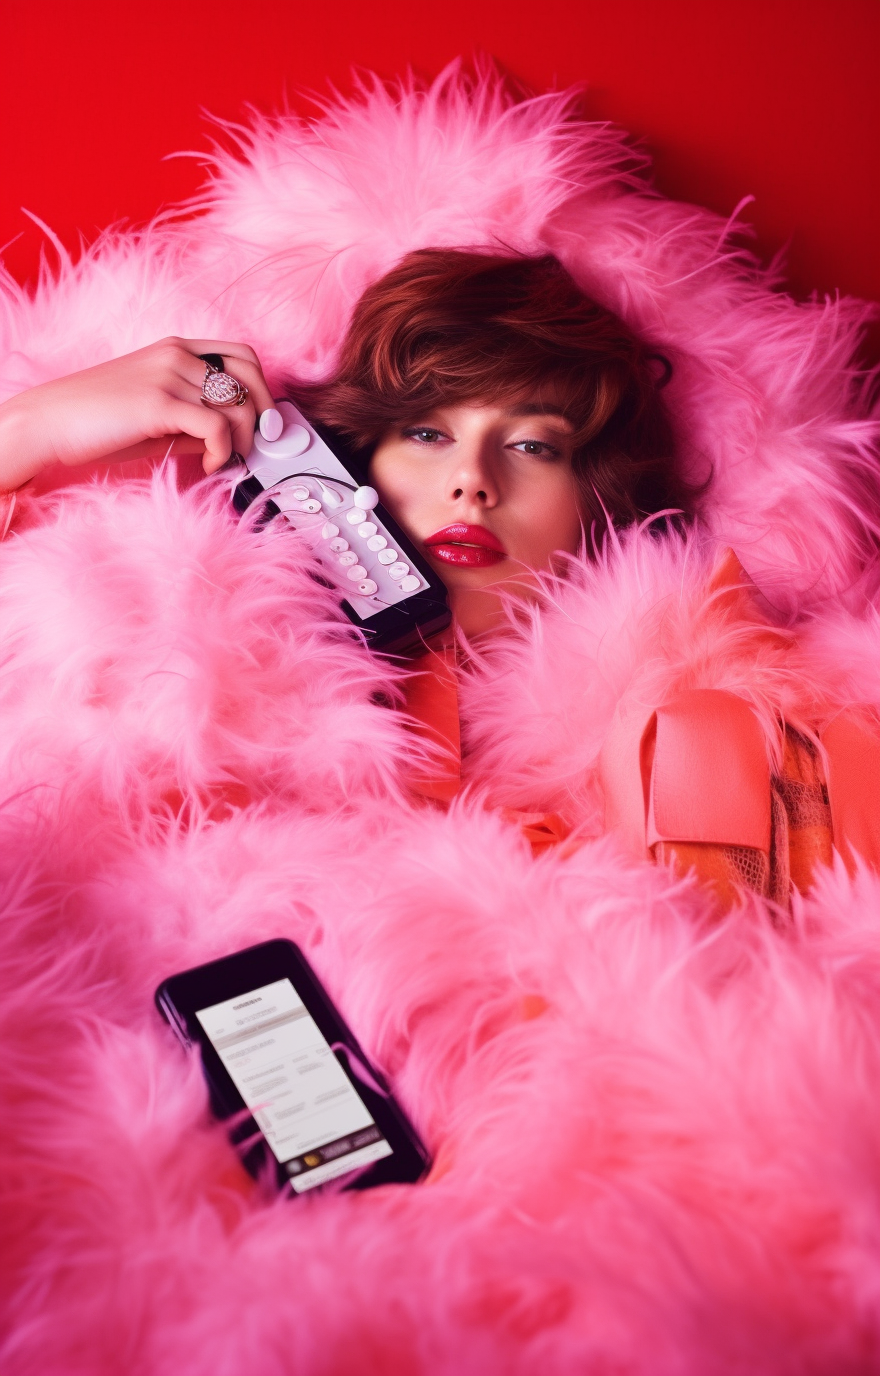 Woman lying in bed surrounded by pink feathers, talking on a phone with falling buttons, in the style of iconic movie shots, created with Midjourney.